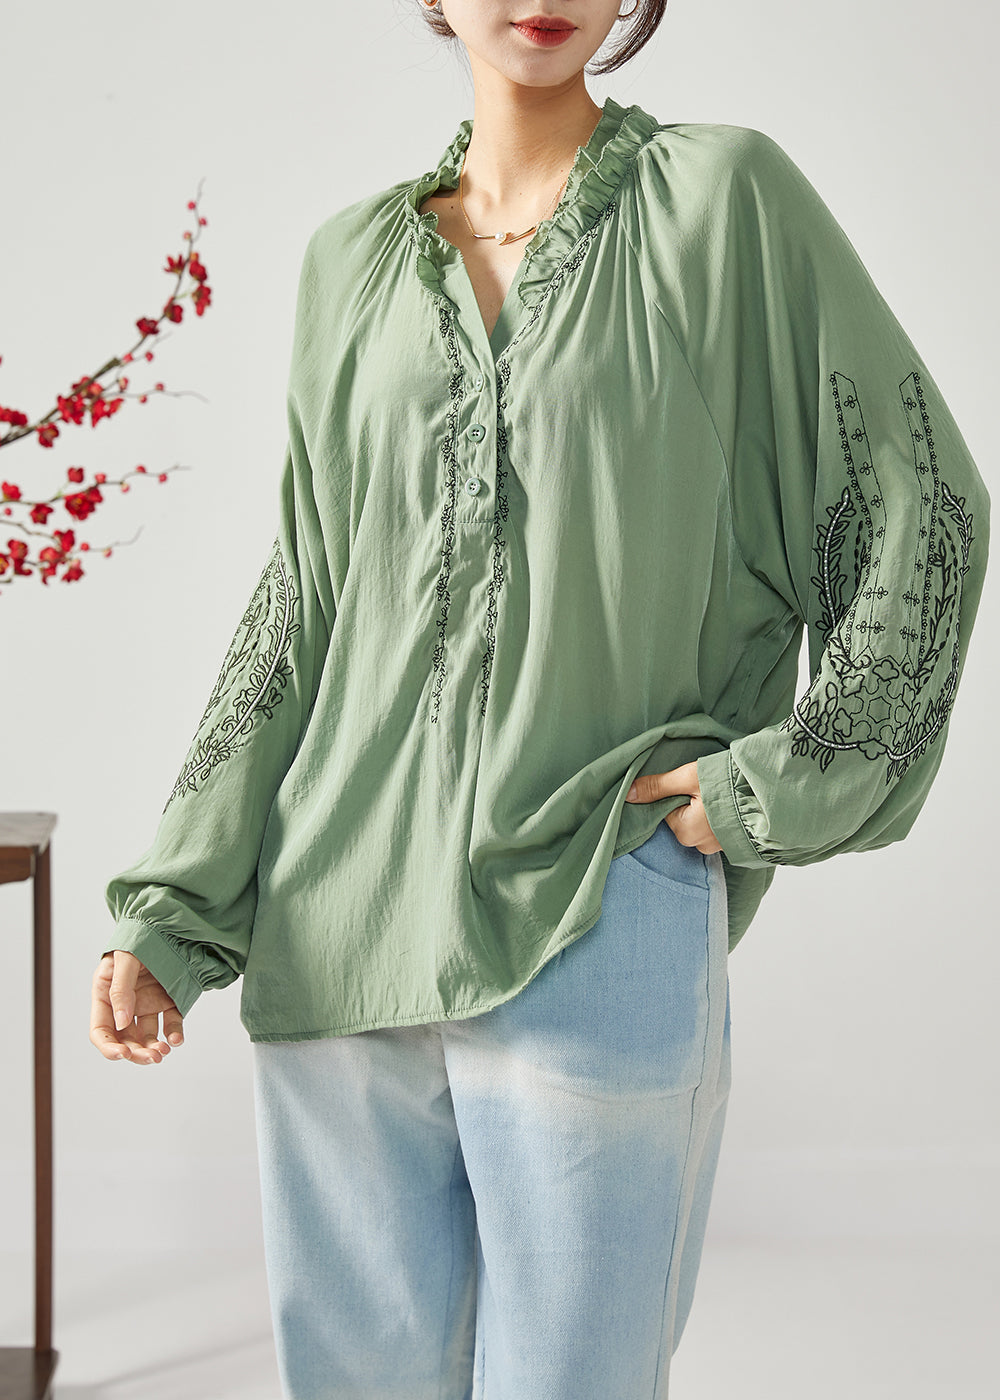 French Army Green Embroideried Ruffled Cotton Shirts Spring LY1112 - fabuloryshop